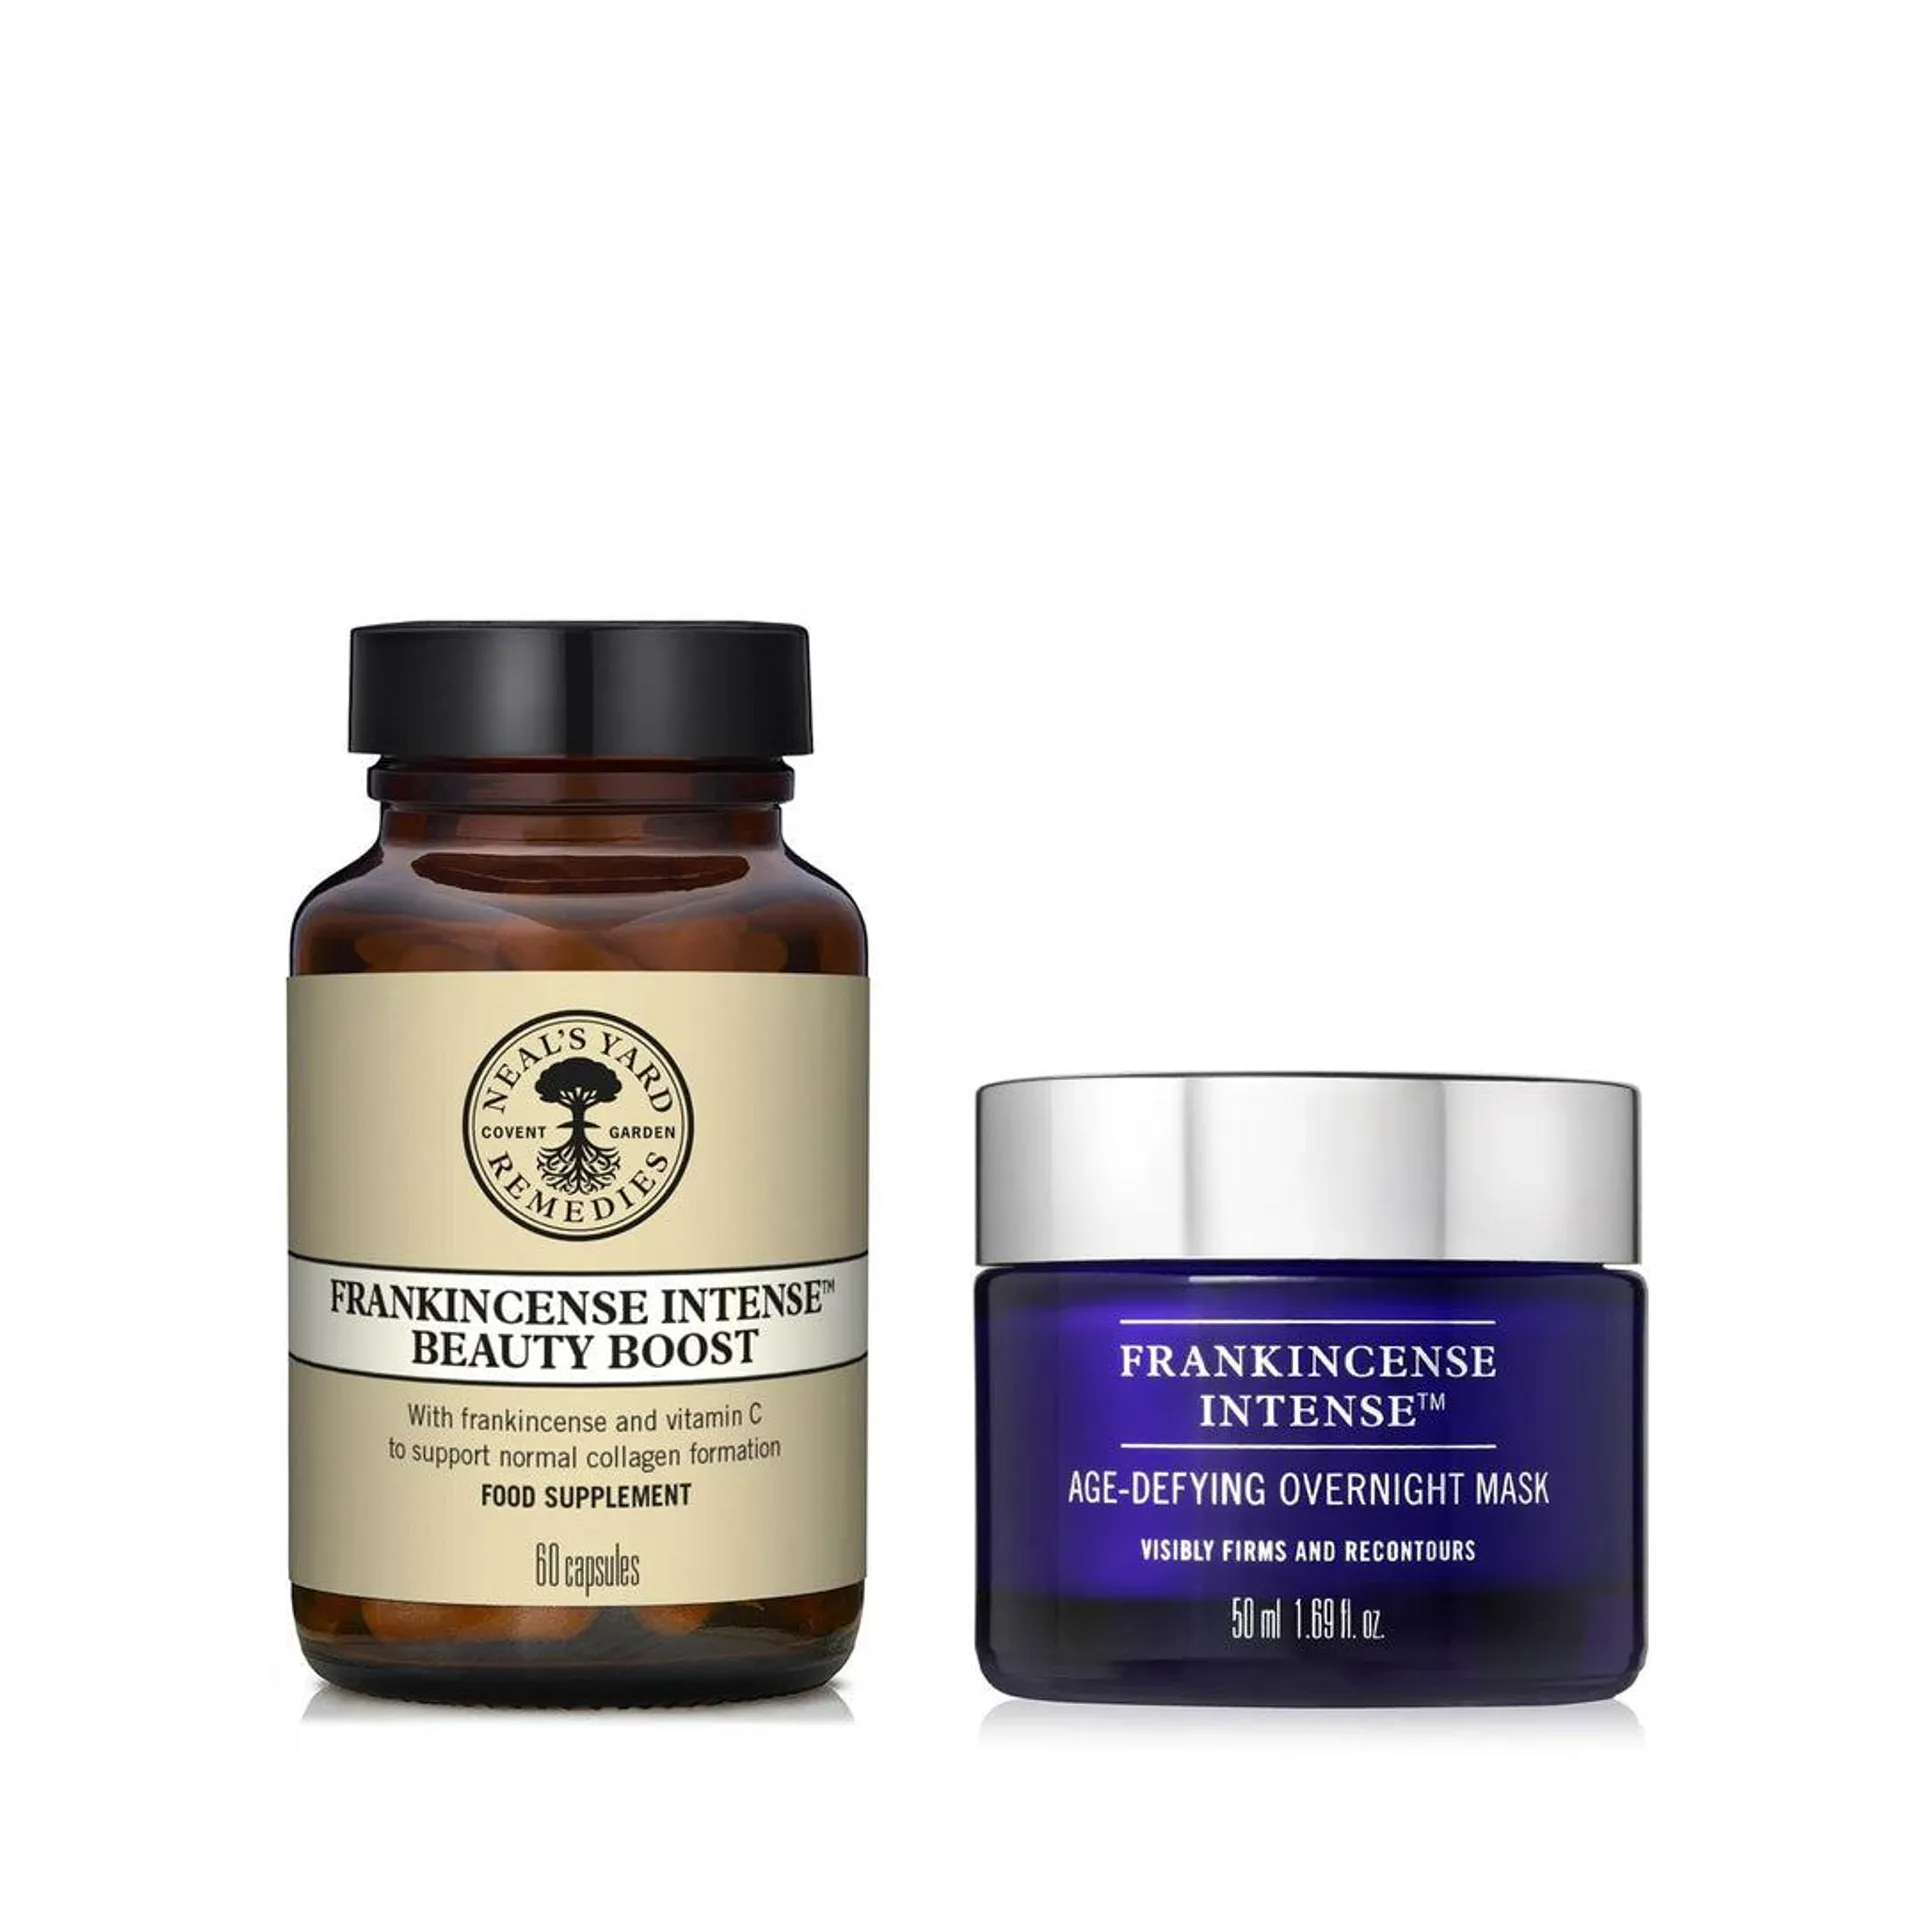 Frankincense Intense™ Age-Defying Overnight Mask + Beauty Boost Supplement